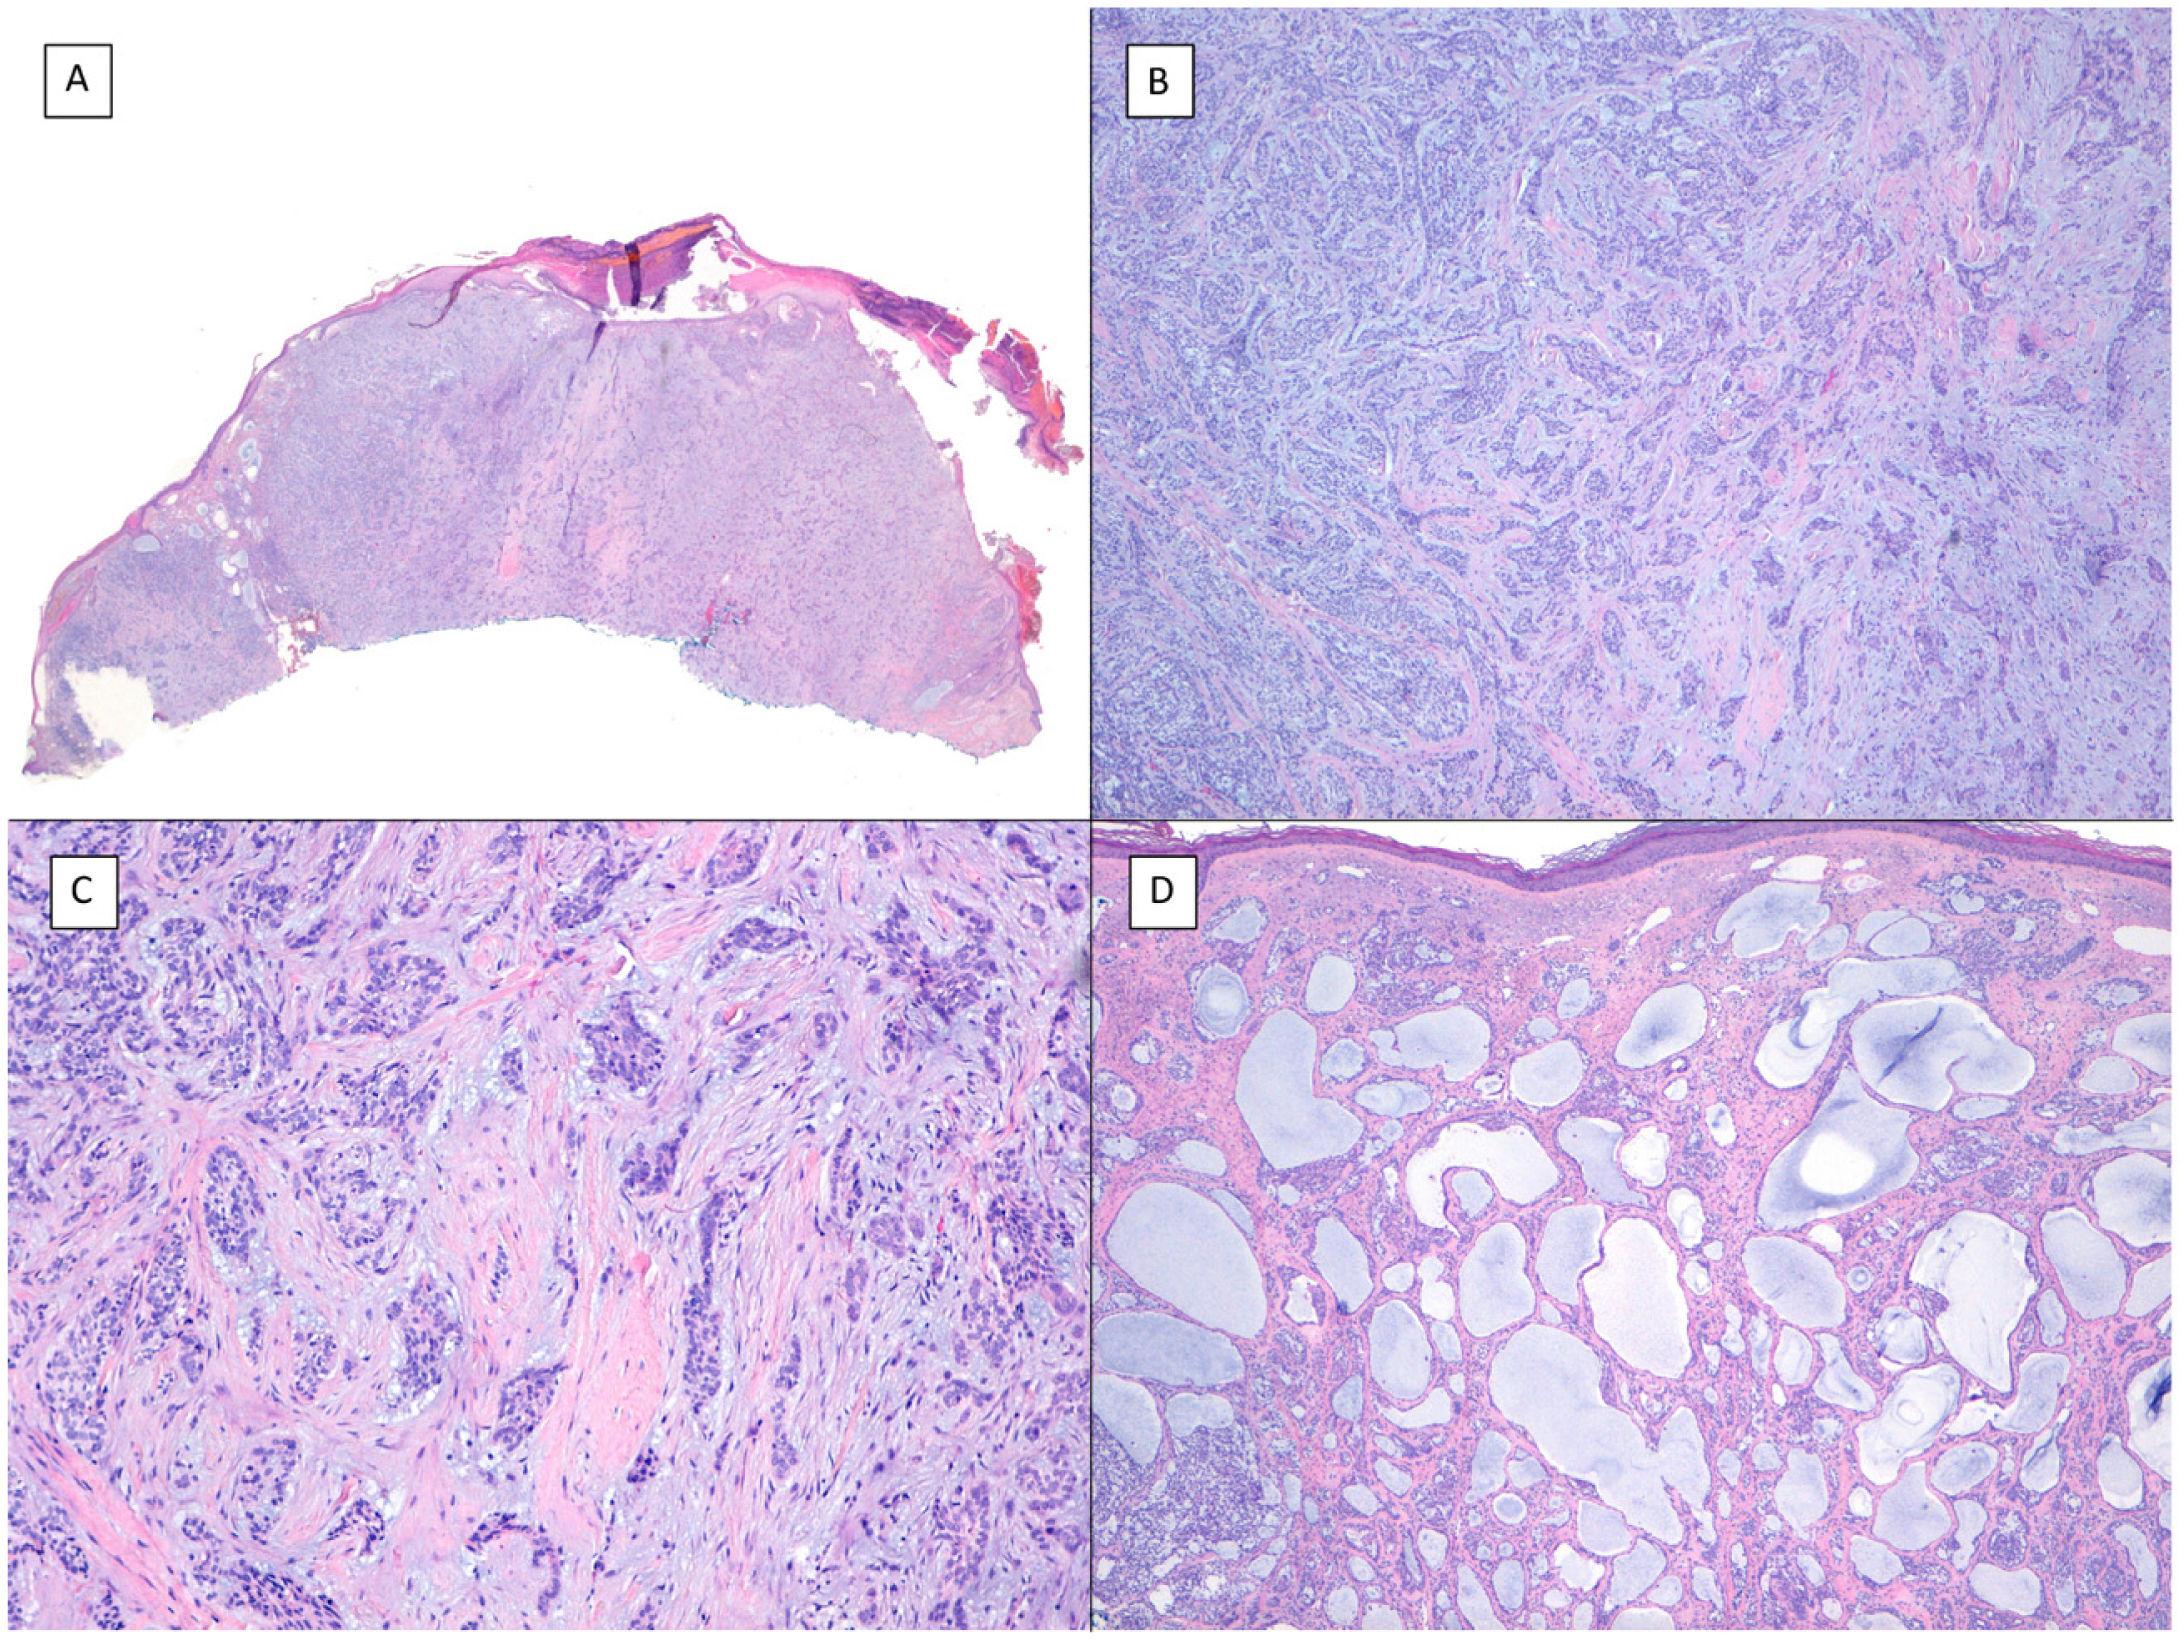 basal cell carcinoma vs squamous cell carcinoma histology